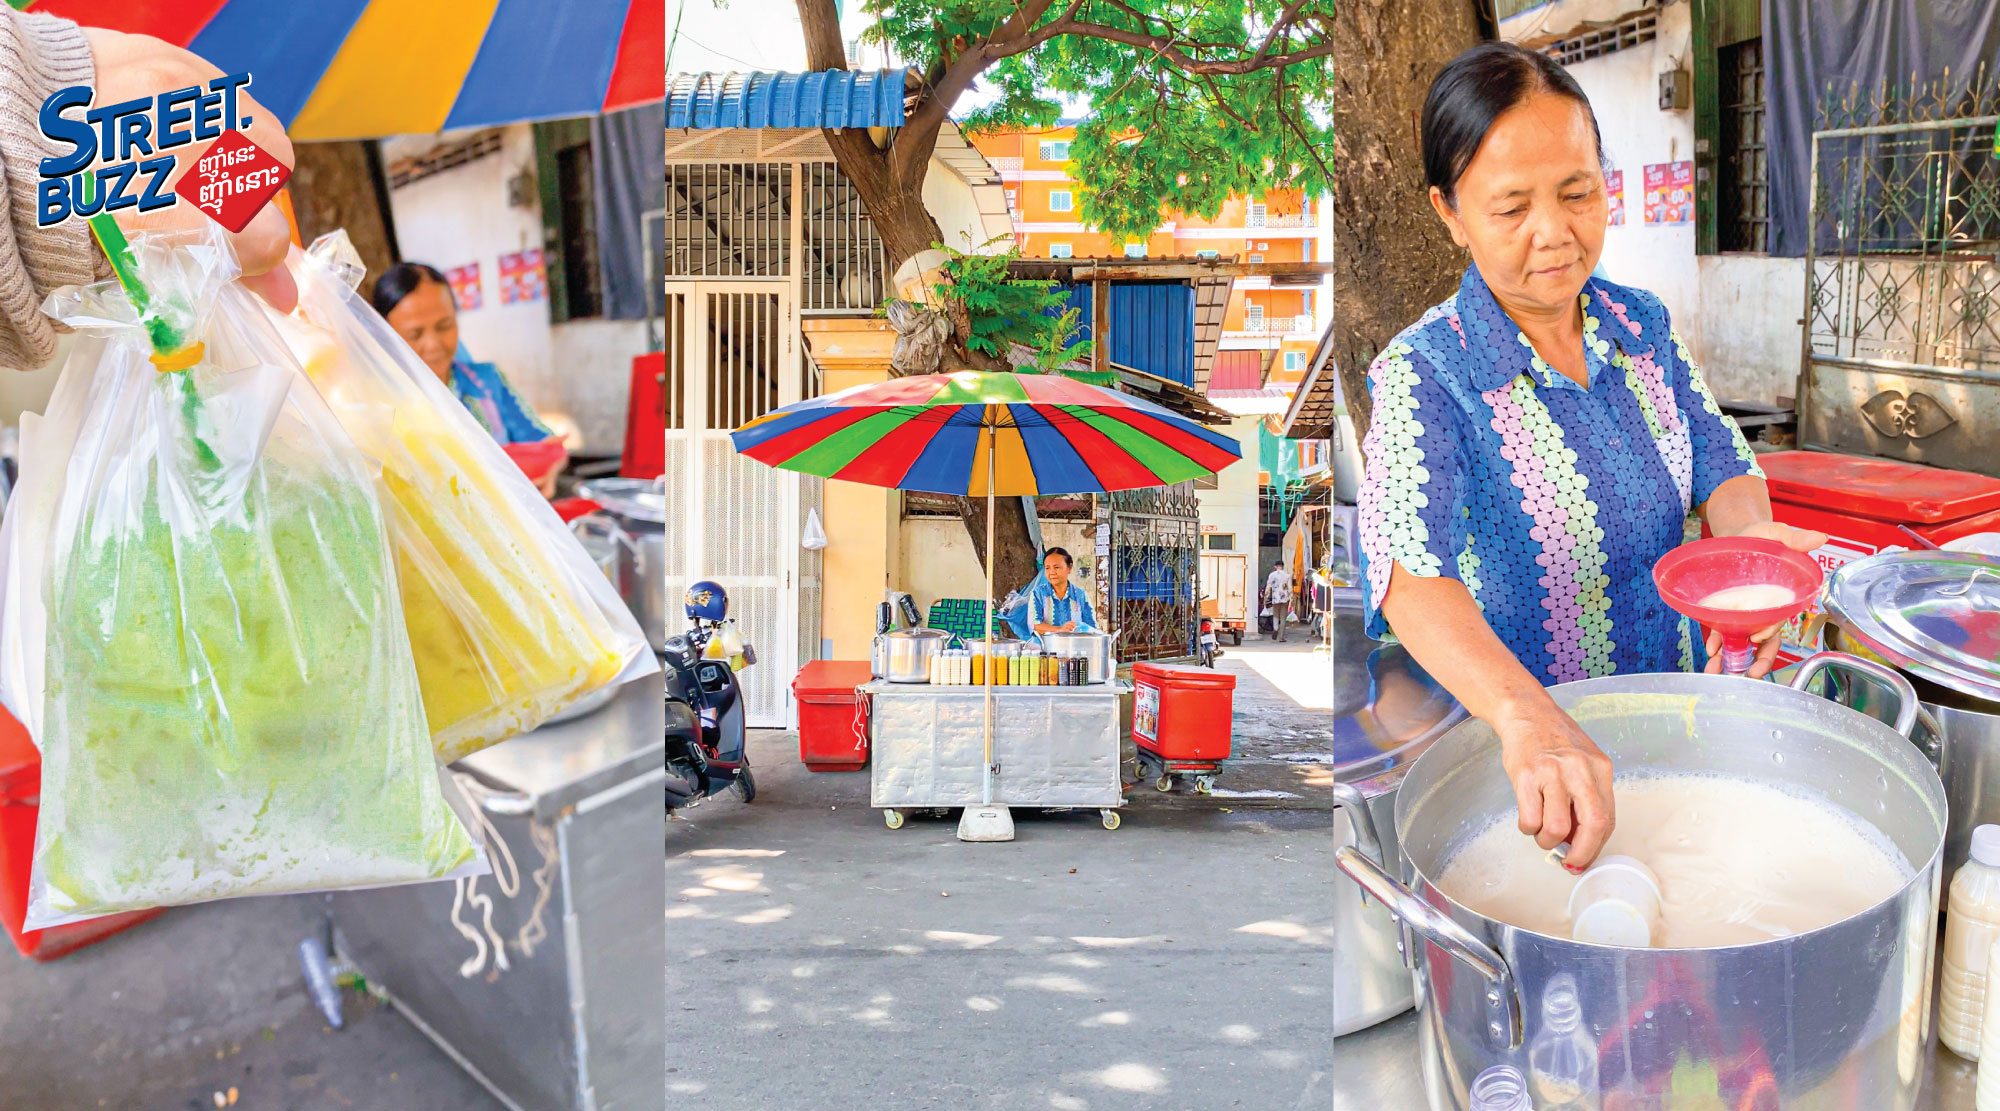 Soymilk granny has served clients for 20 years and still gets daily significant orders.